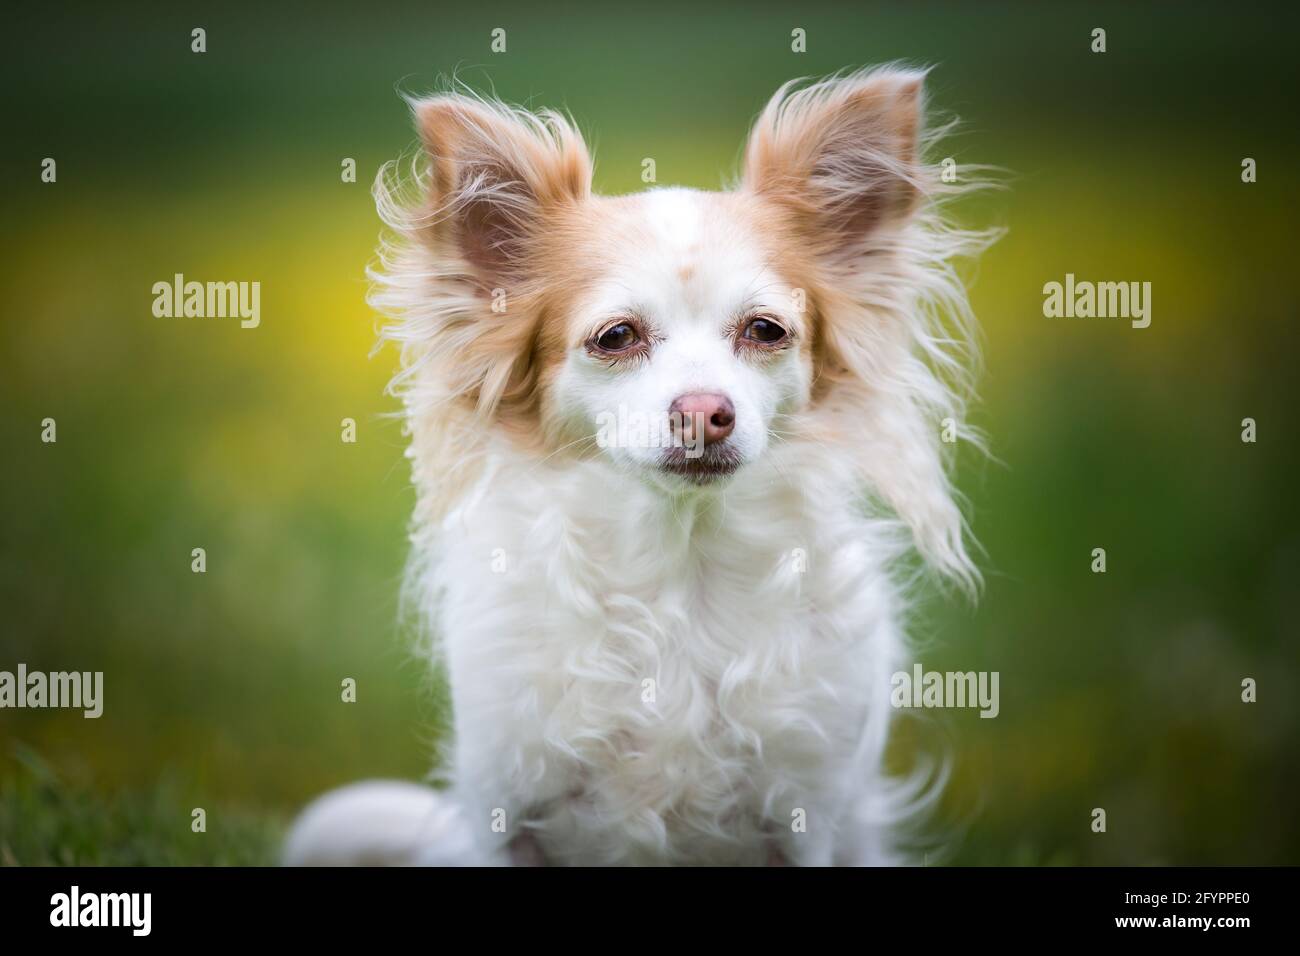 Page 2 - Chihuahua Teacup High Resolution Stock Photography and Images -  Alamy